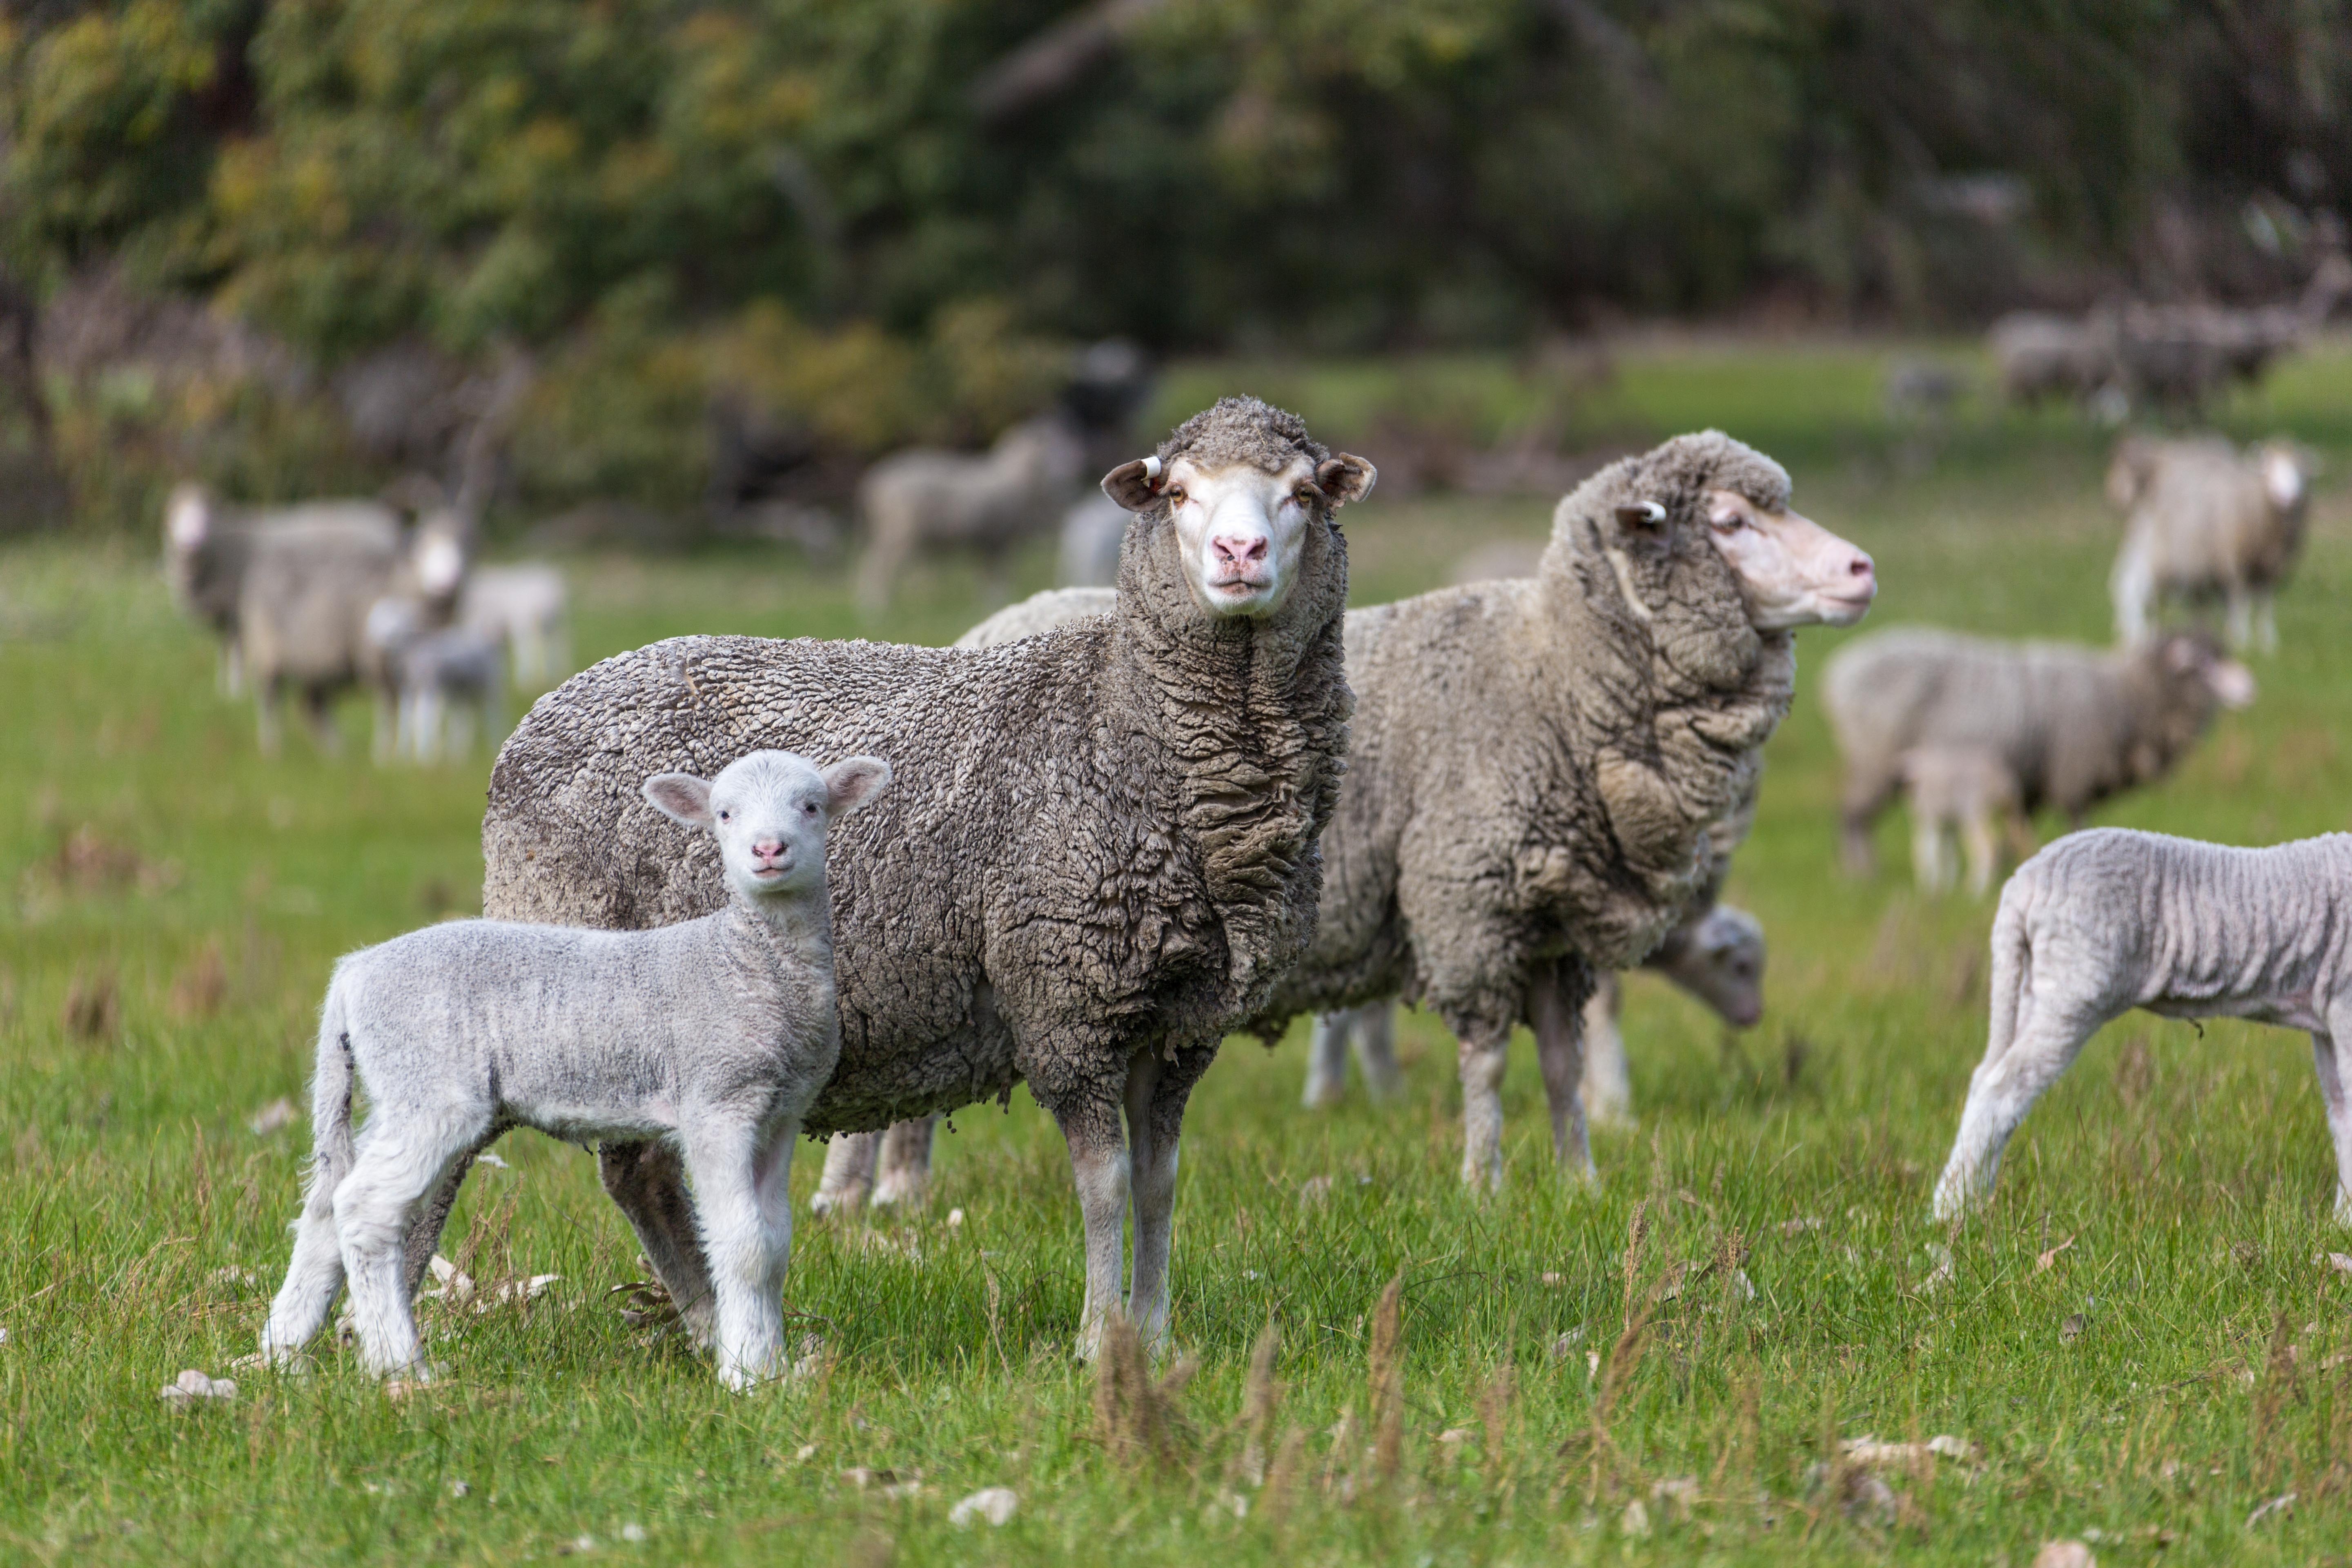 Pregnancy toxaemia and hypocalcaemia of ewes | Agriculture and Food